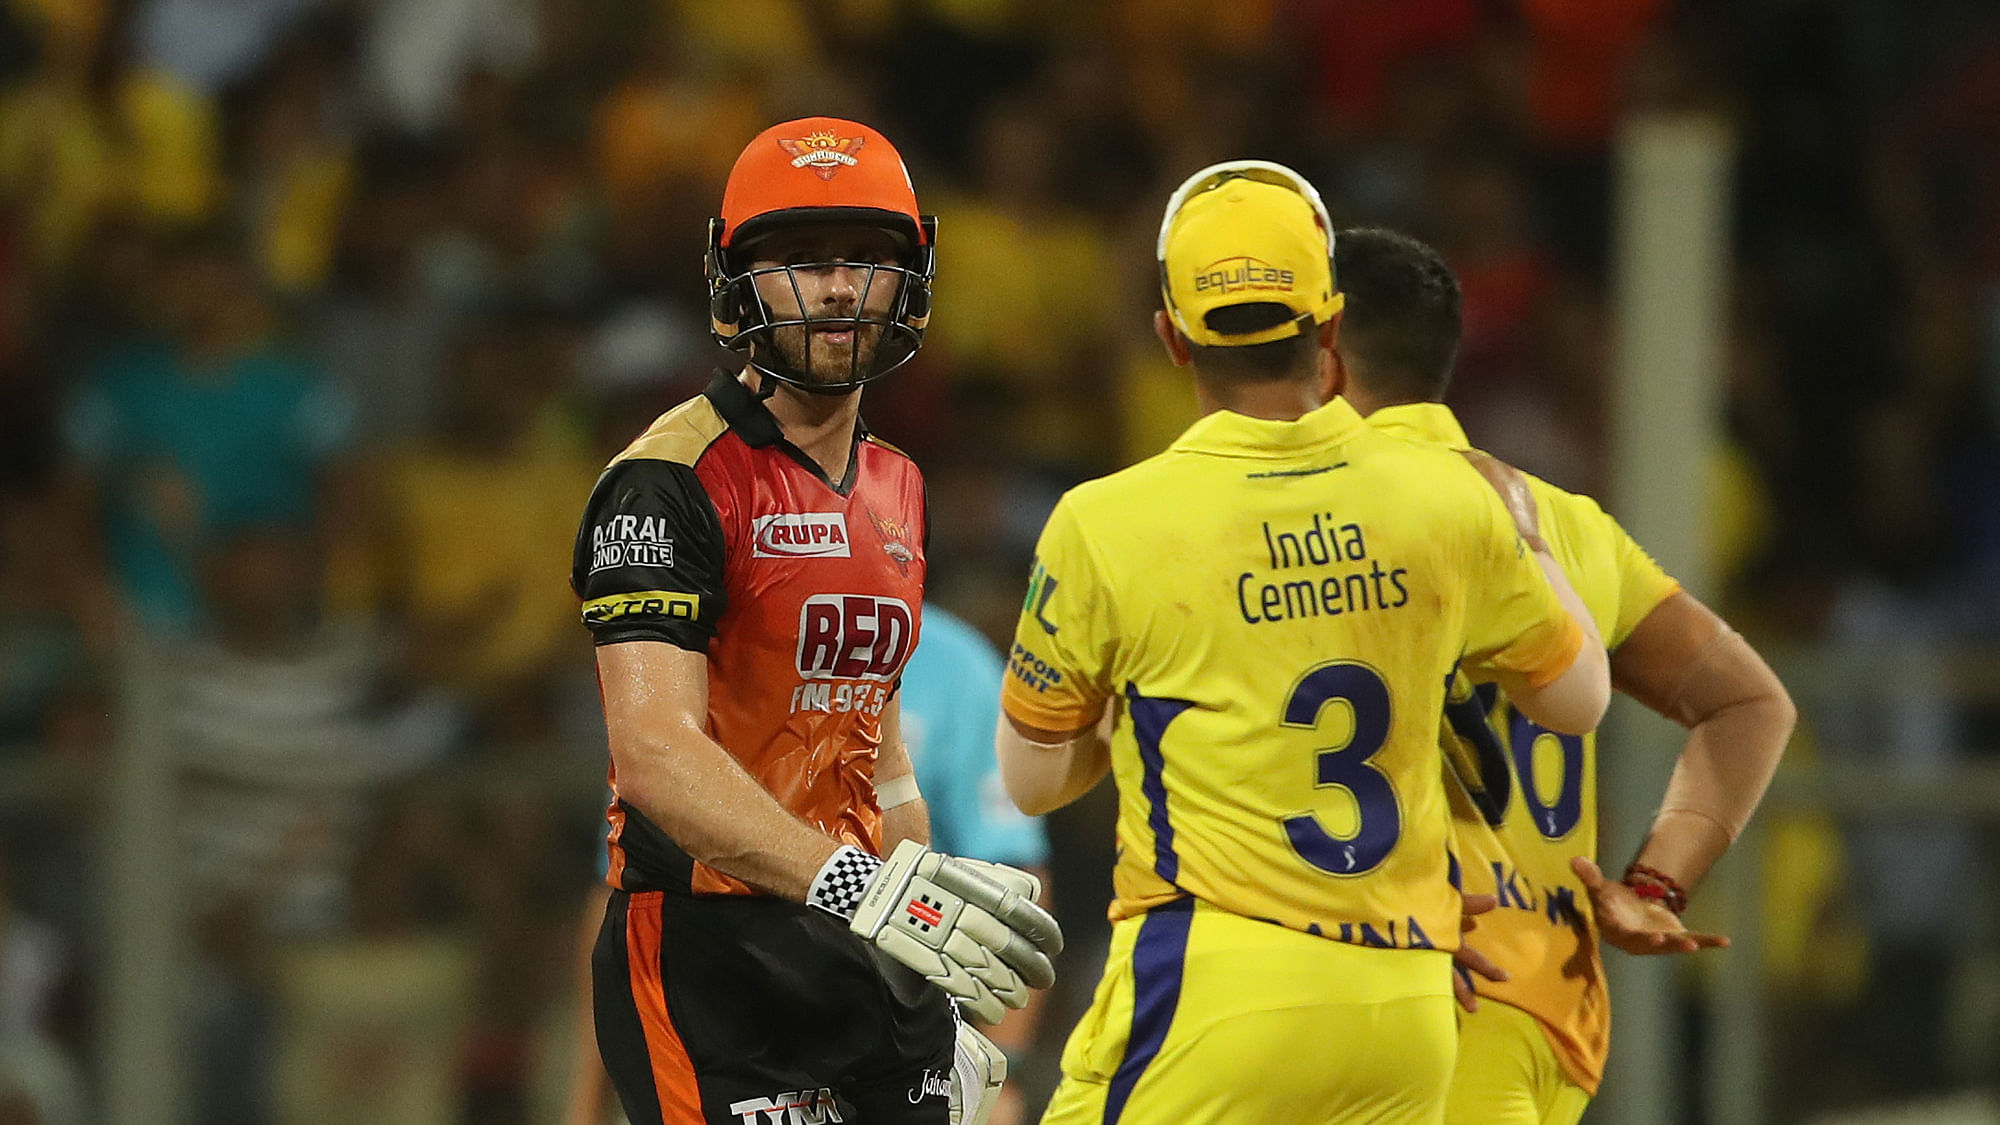 Kane Williamson of the Sunrisers Hyderabad reacts after losing his wicket during the Final of the Vivo Indian Premier League 2018 (IPL 2018) between the Chennai Super Kings and the Sunrisers Hyderabad held at the Wankhede Stadium in Mumbai on the 27th May 2018.